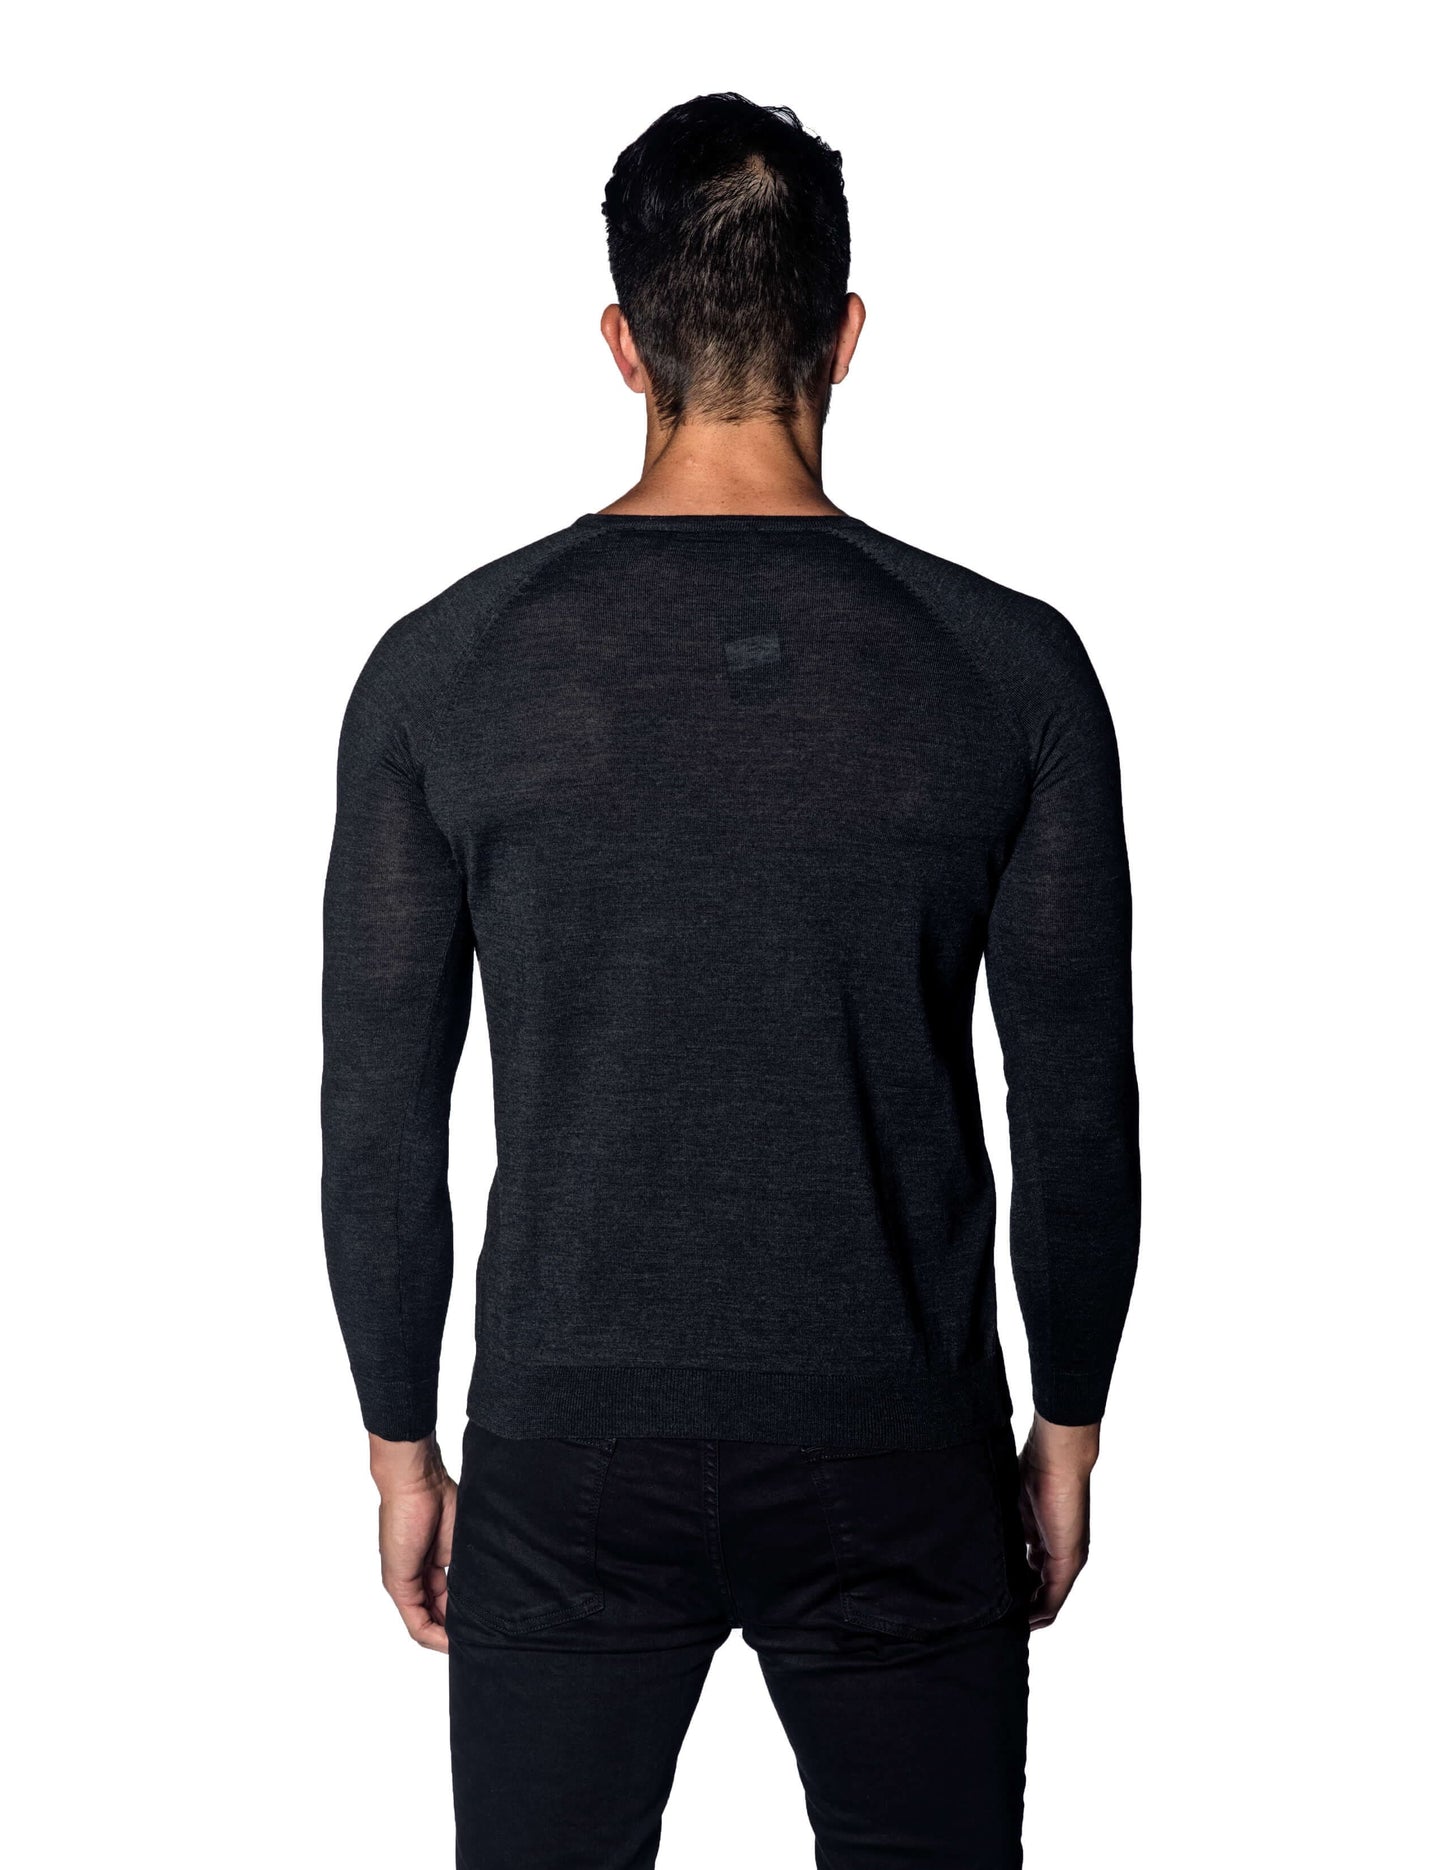 Charcoal Men's Sweater Faux Pocket Crew Neck 1896-CH - Back - Jared Lang